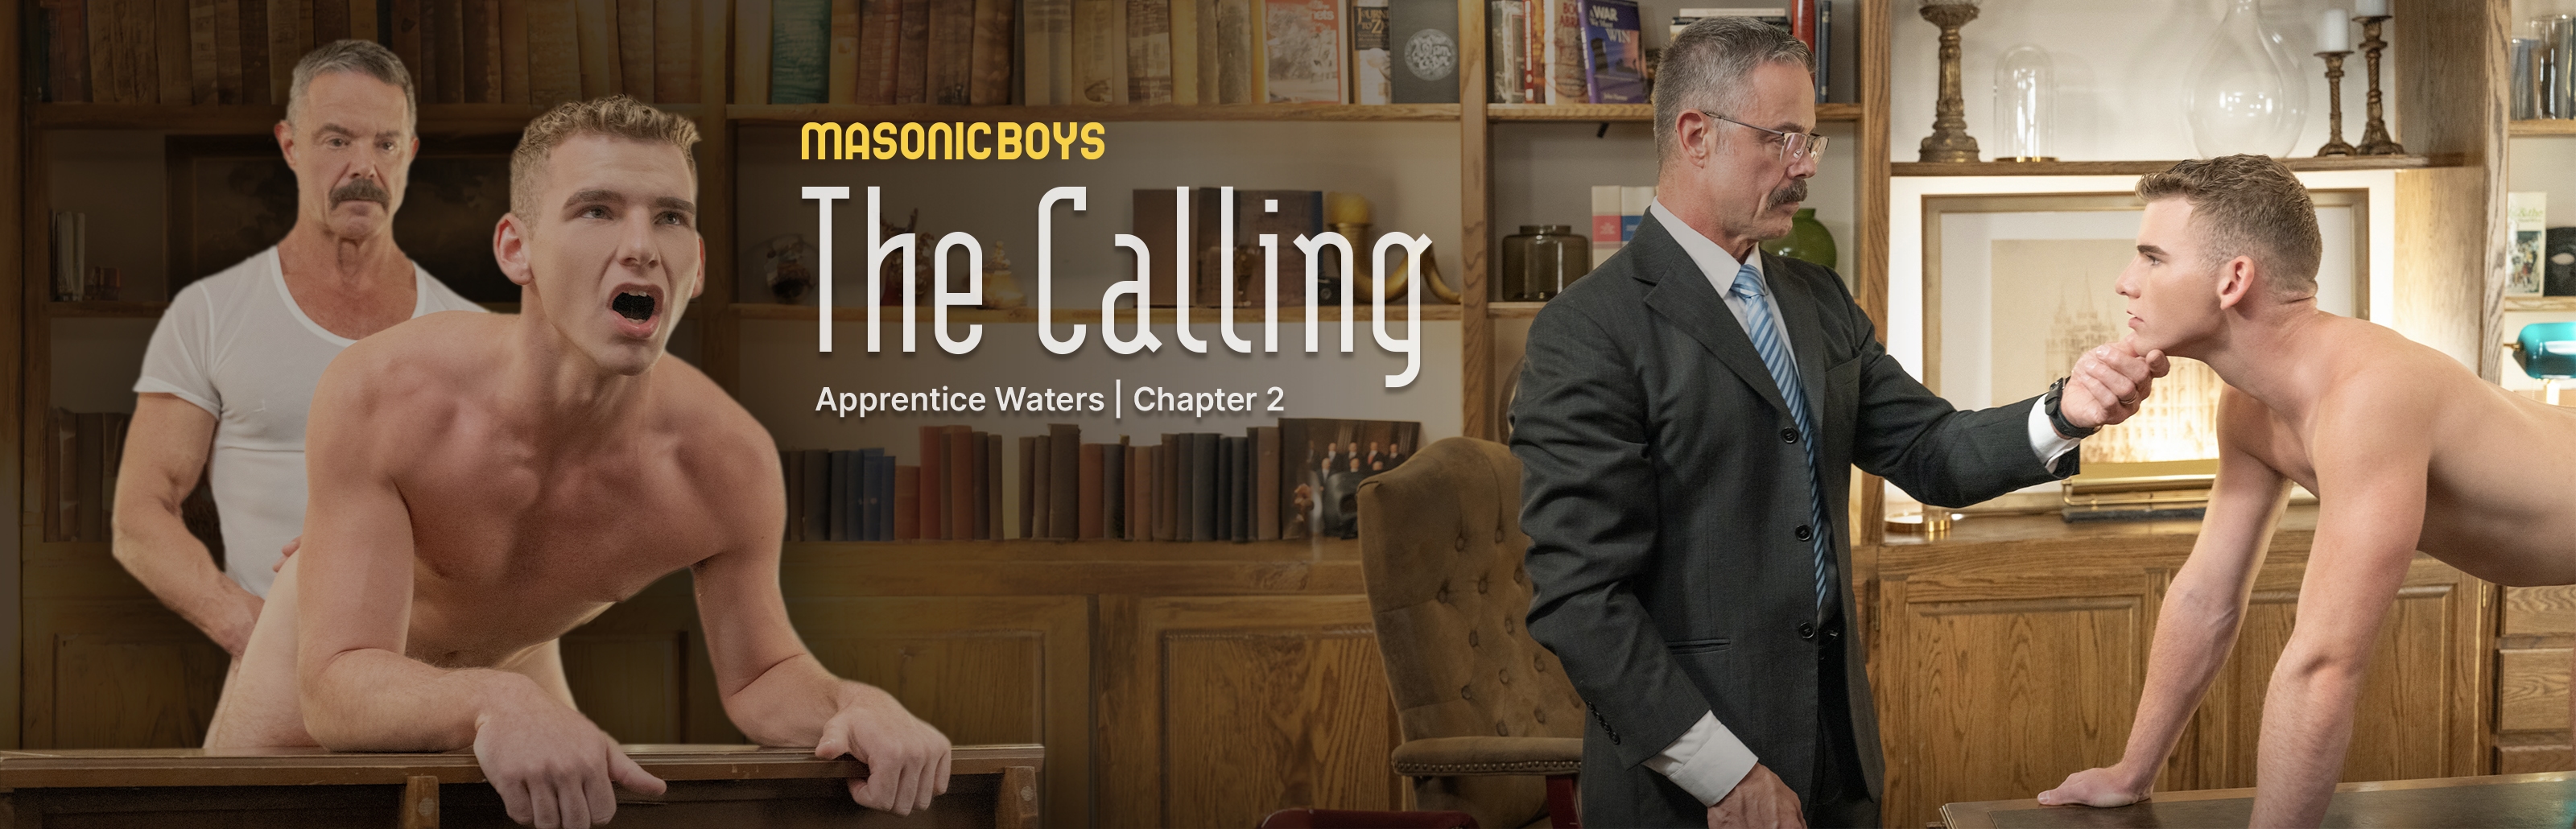 The Calling | APPRENTICE WATERS | Chapter 2 Photos 97